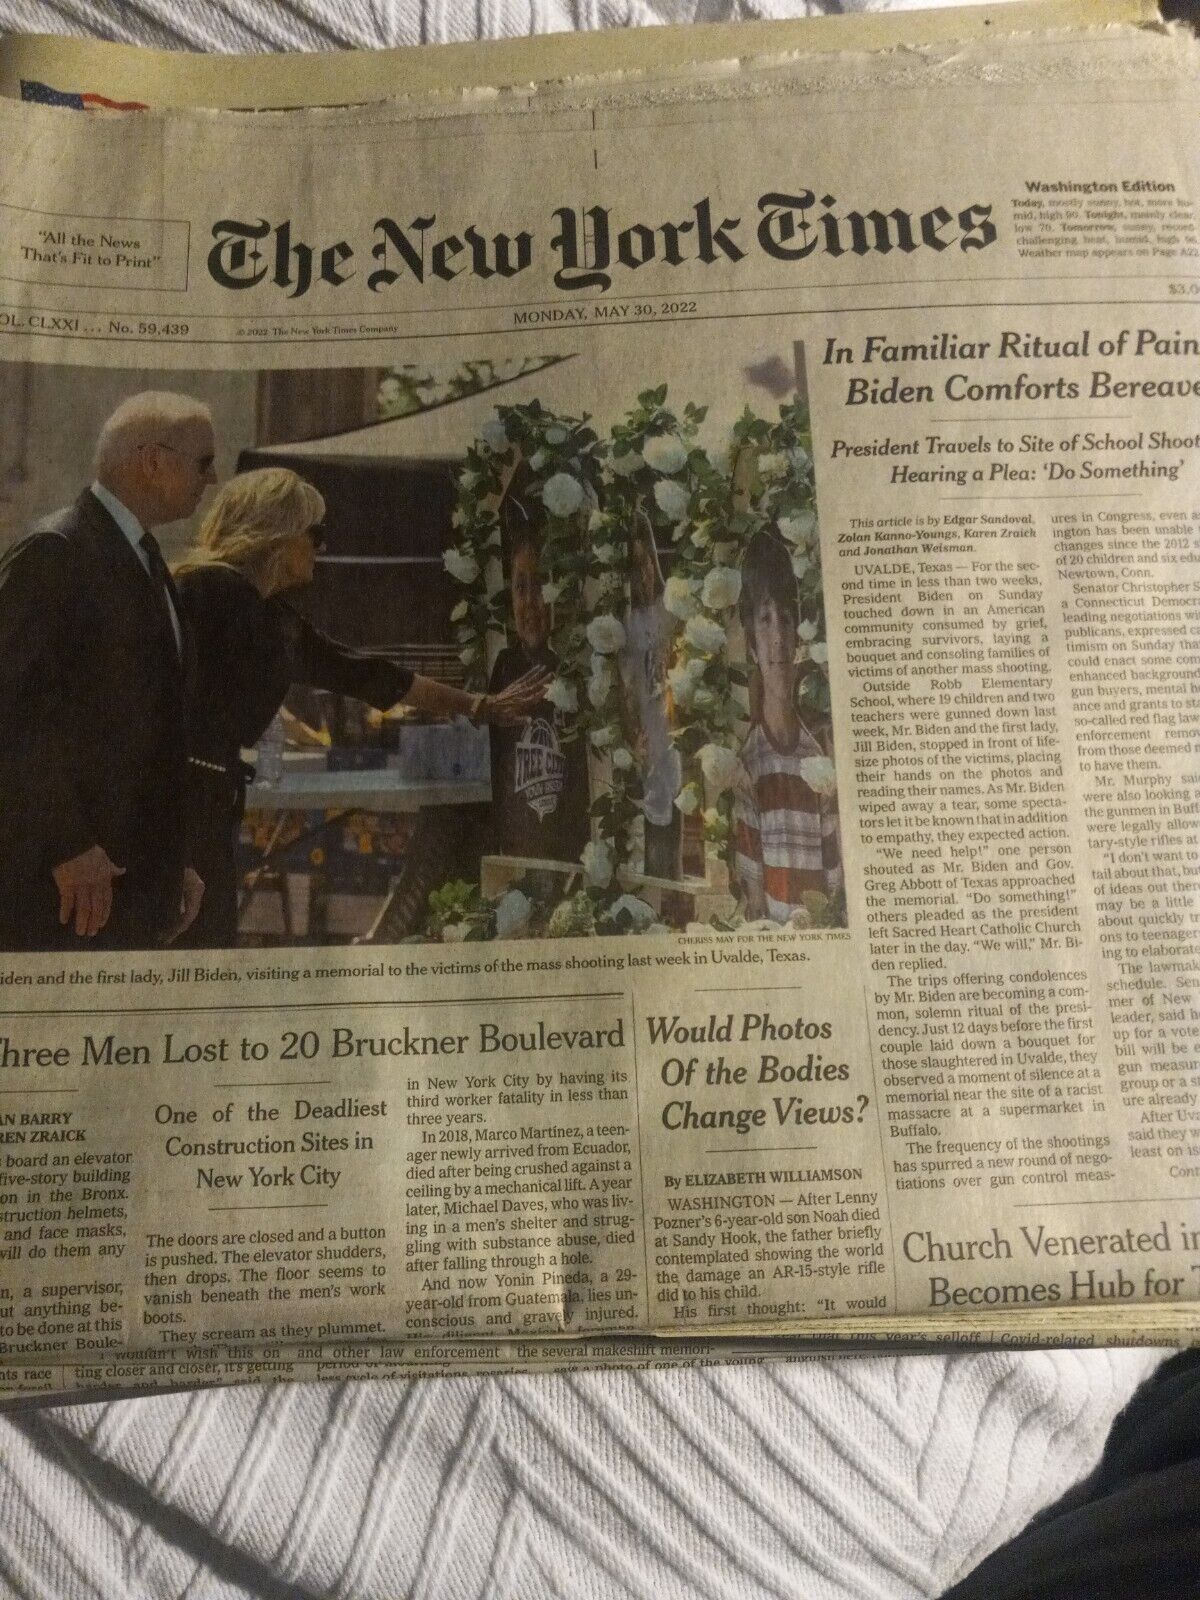 THE NEW YORK TIMES MONDAY MAY 30, 2022